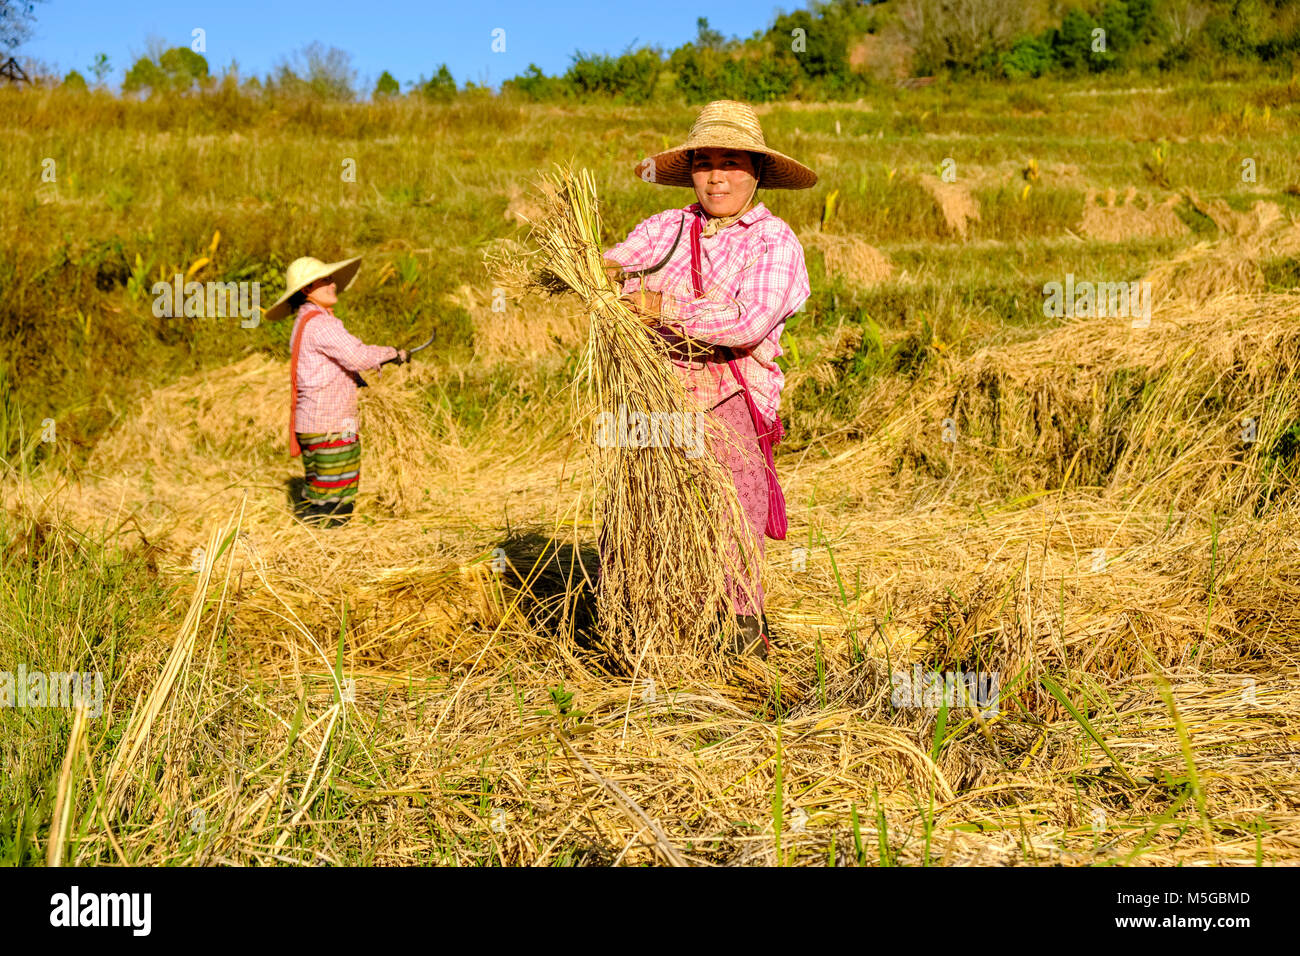 Rice is harvested by women on the fields in the hills of the tribal area in the traditional way Stock Photo